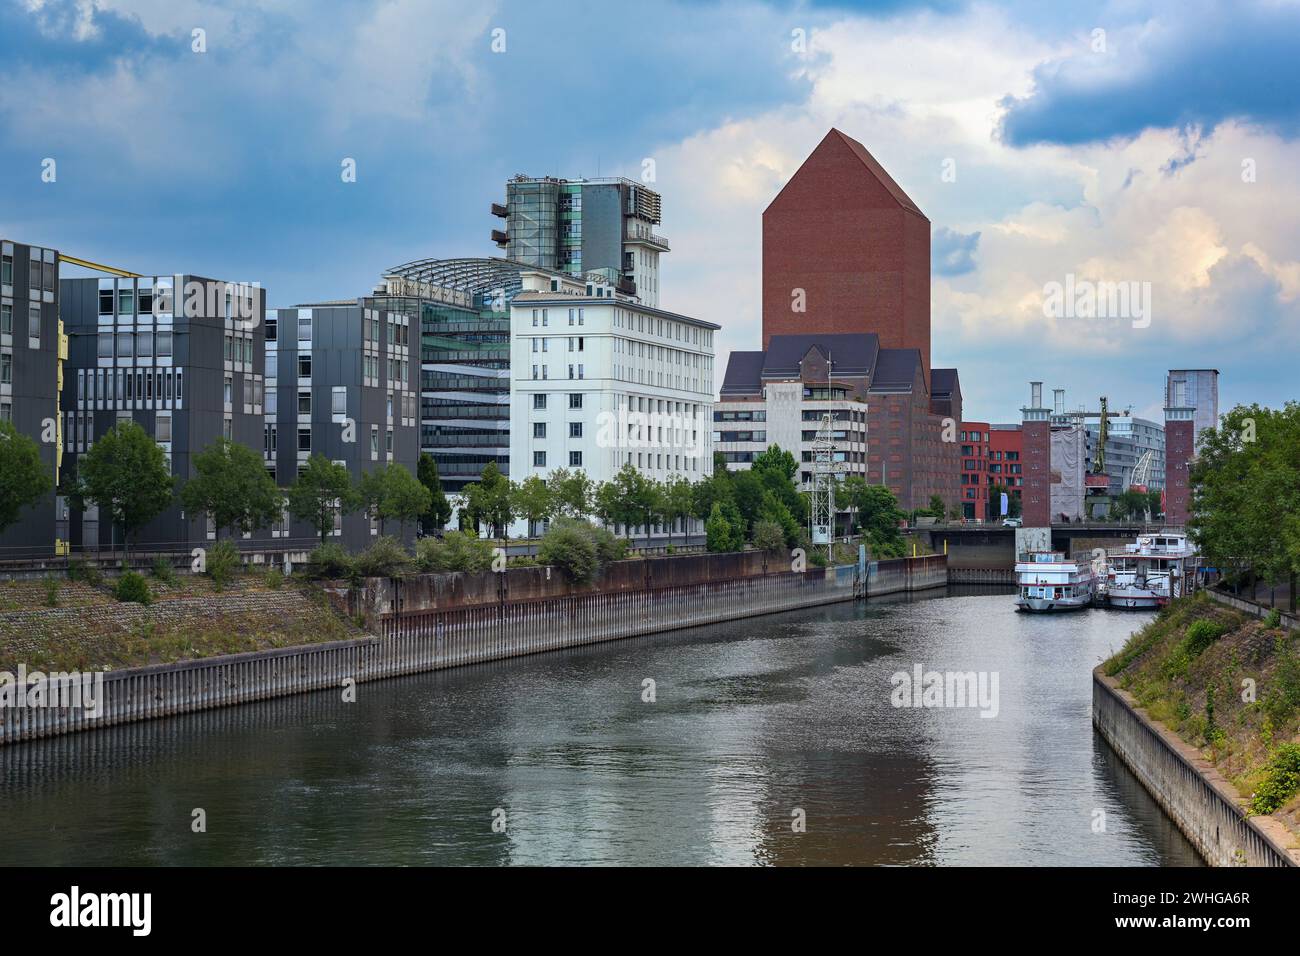 Inner harbor of Duisburg, Germany with the State archive of North Rhine-Westphalia, the monumental tower building of red brick w Stock Photo